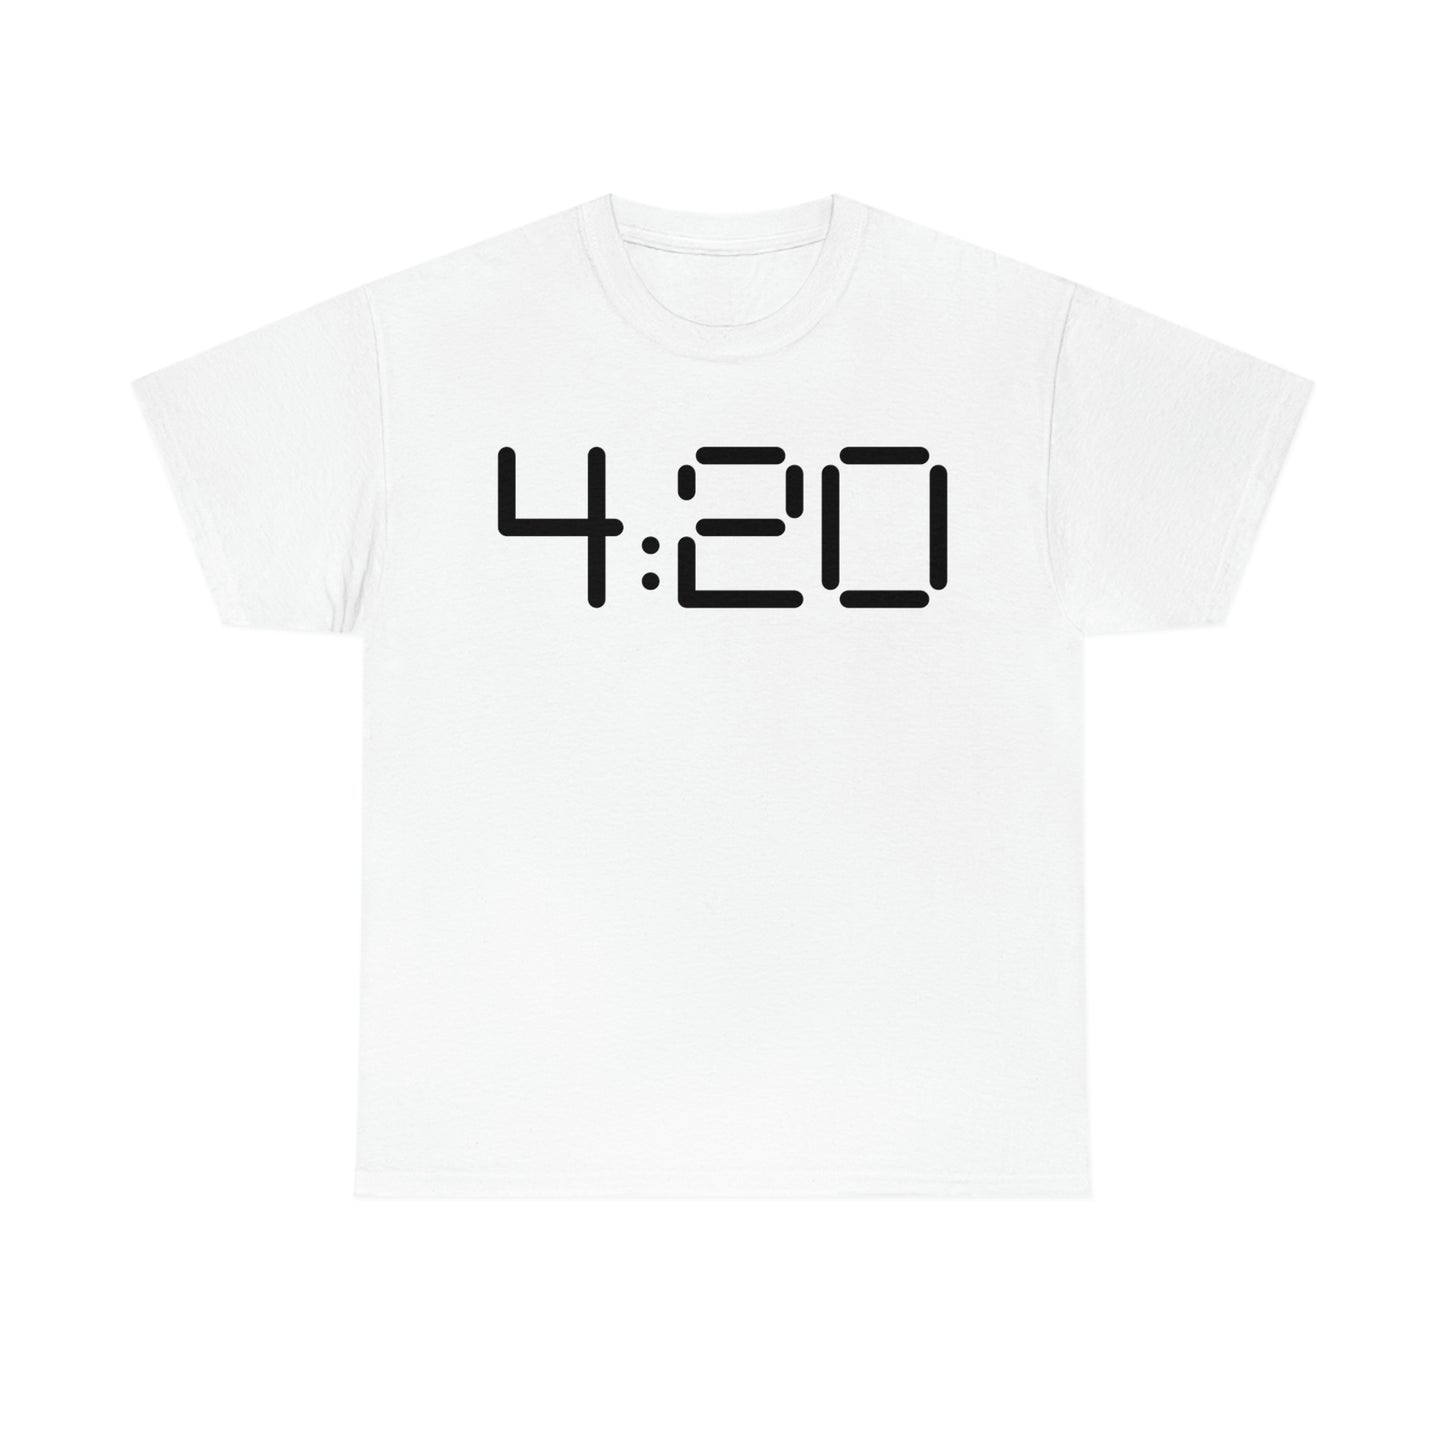 A 420 Stoner Weed T-Shirt with the word 420 on it.